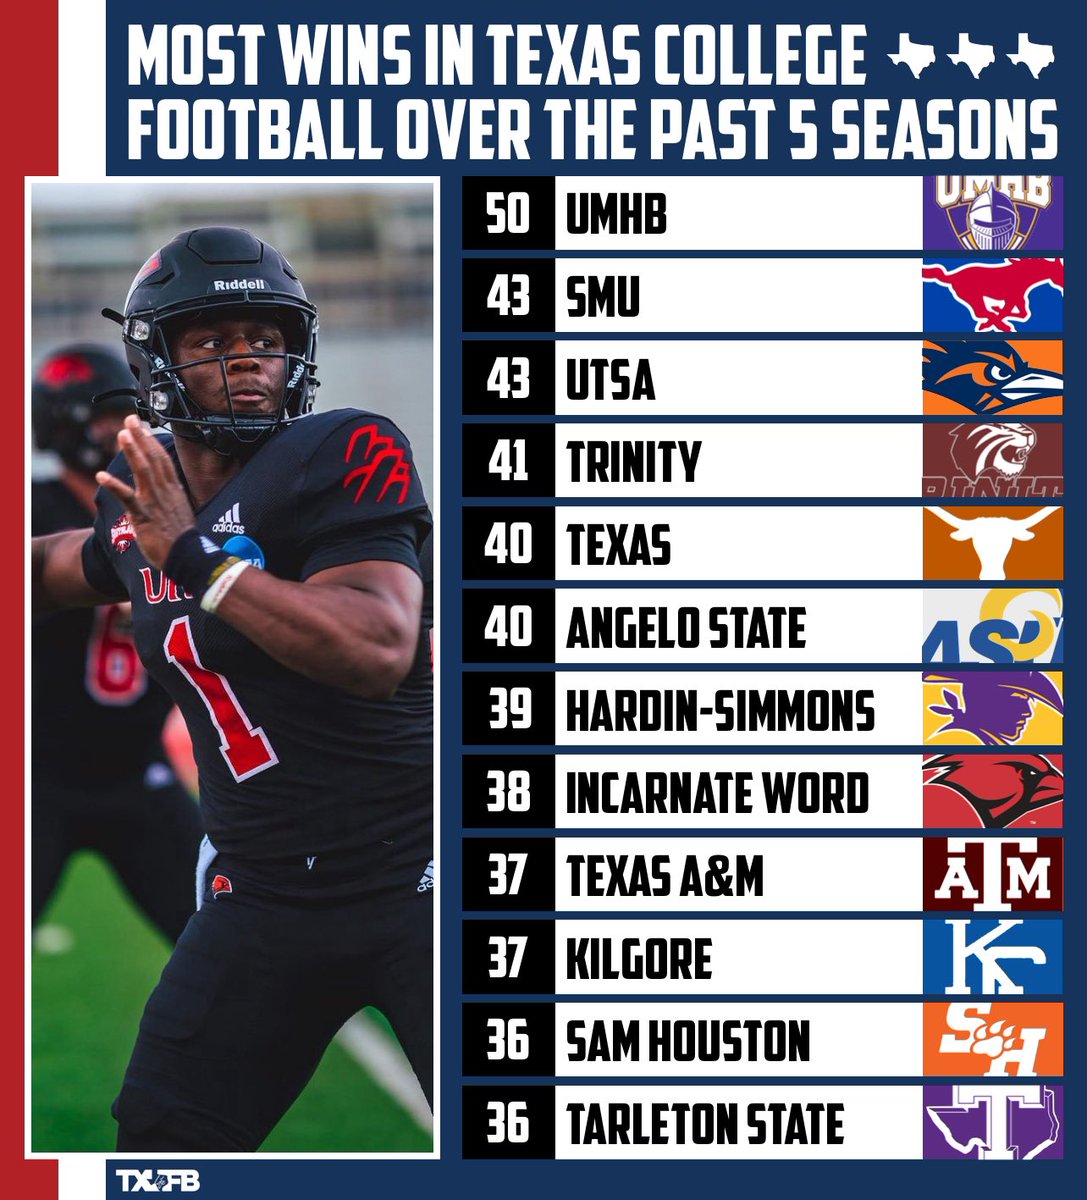 🏈 of the 48 college football programs in Texas, UMHB leads the way with 50 wins since 2019